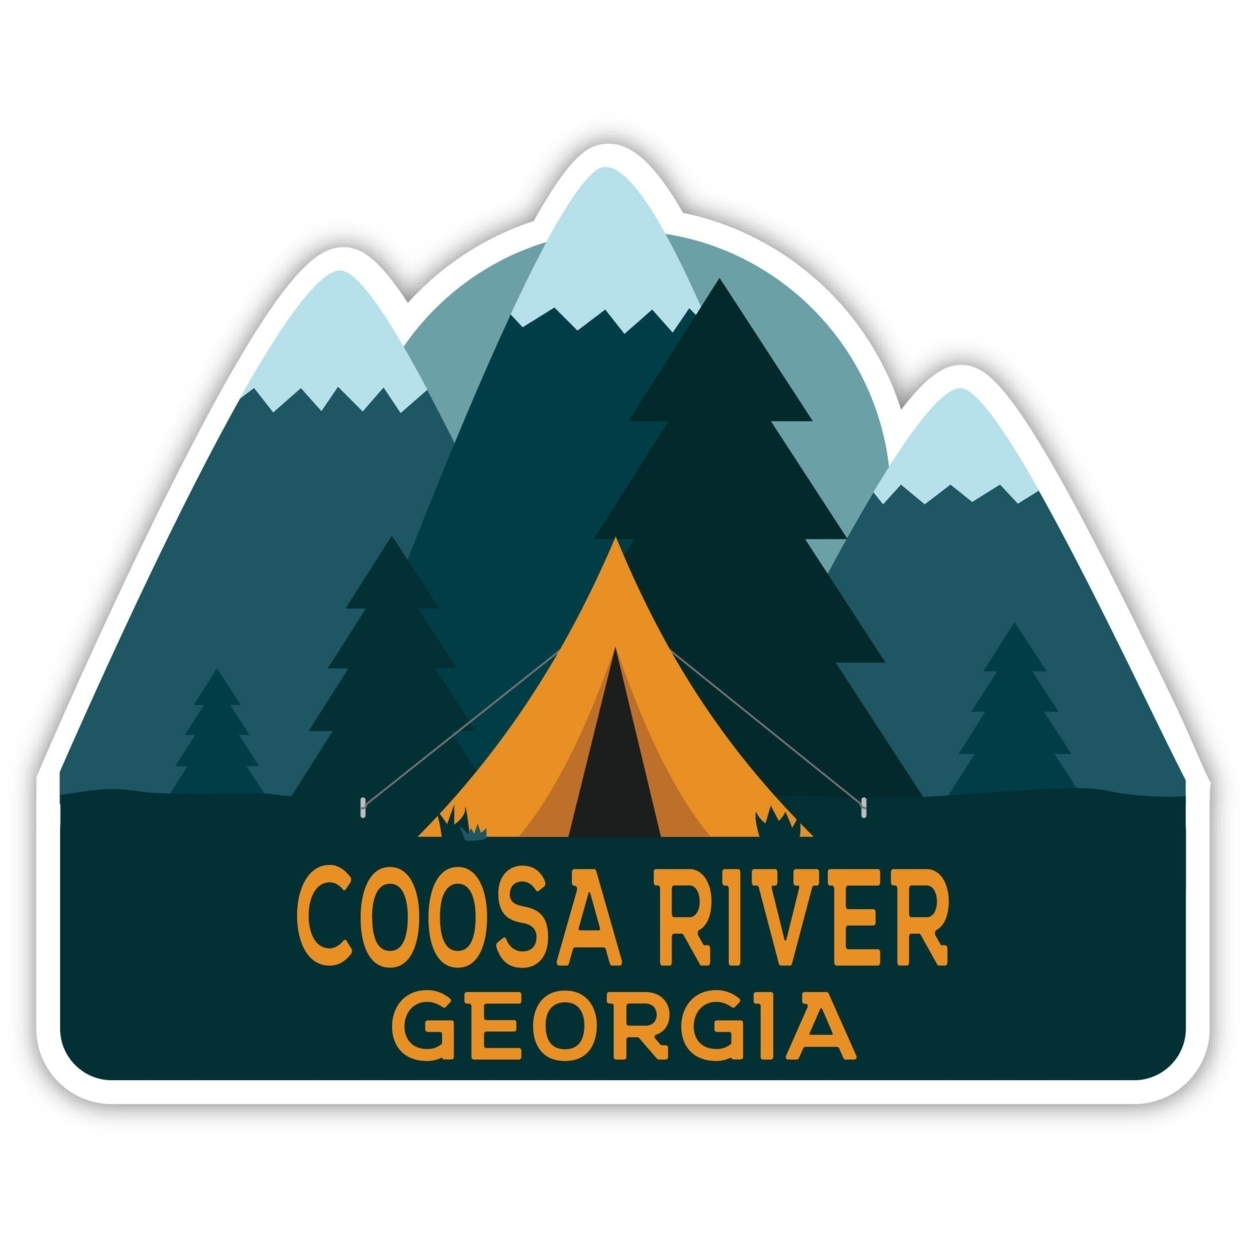 Coosa River Georgia Souvenir Decorative Stickers (Choose Theme And Size) - 4-Pack, 8-Inch, Tent